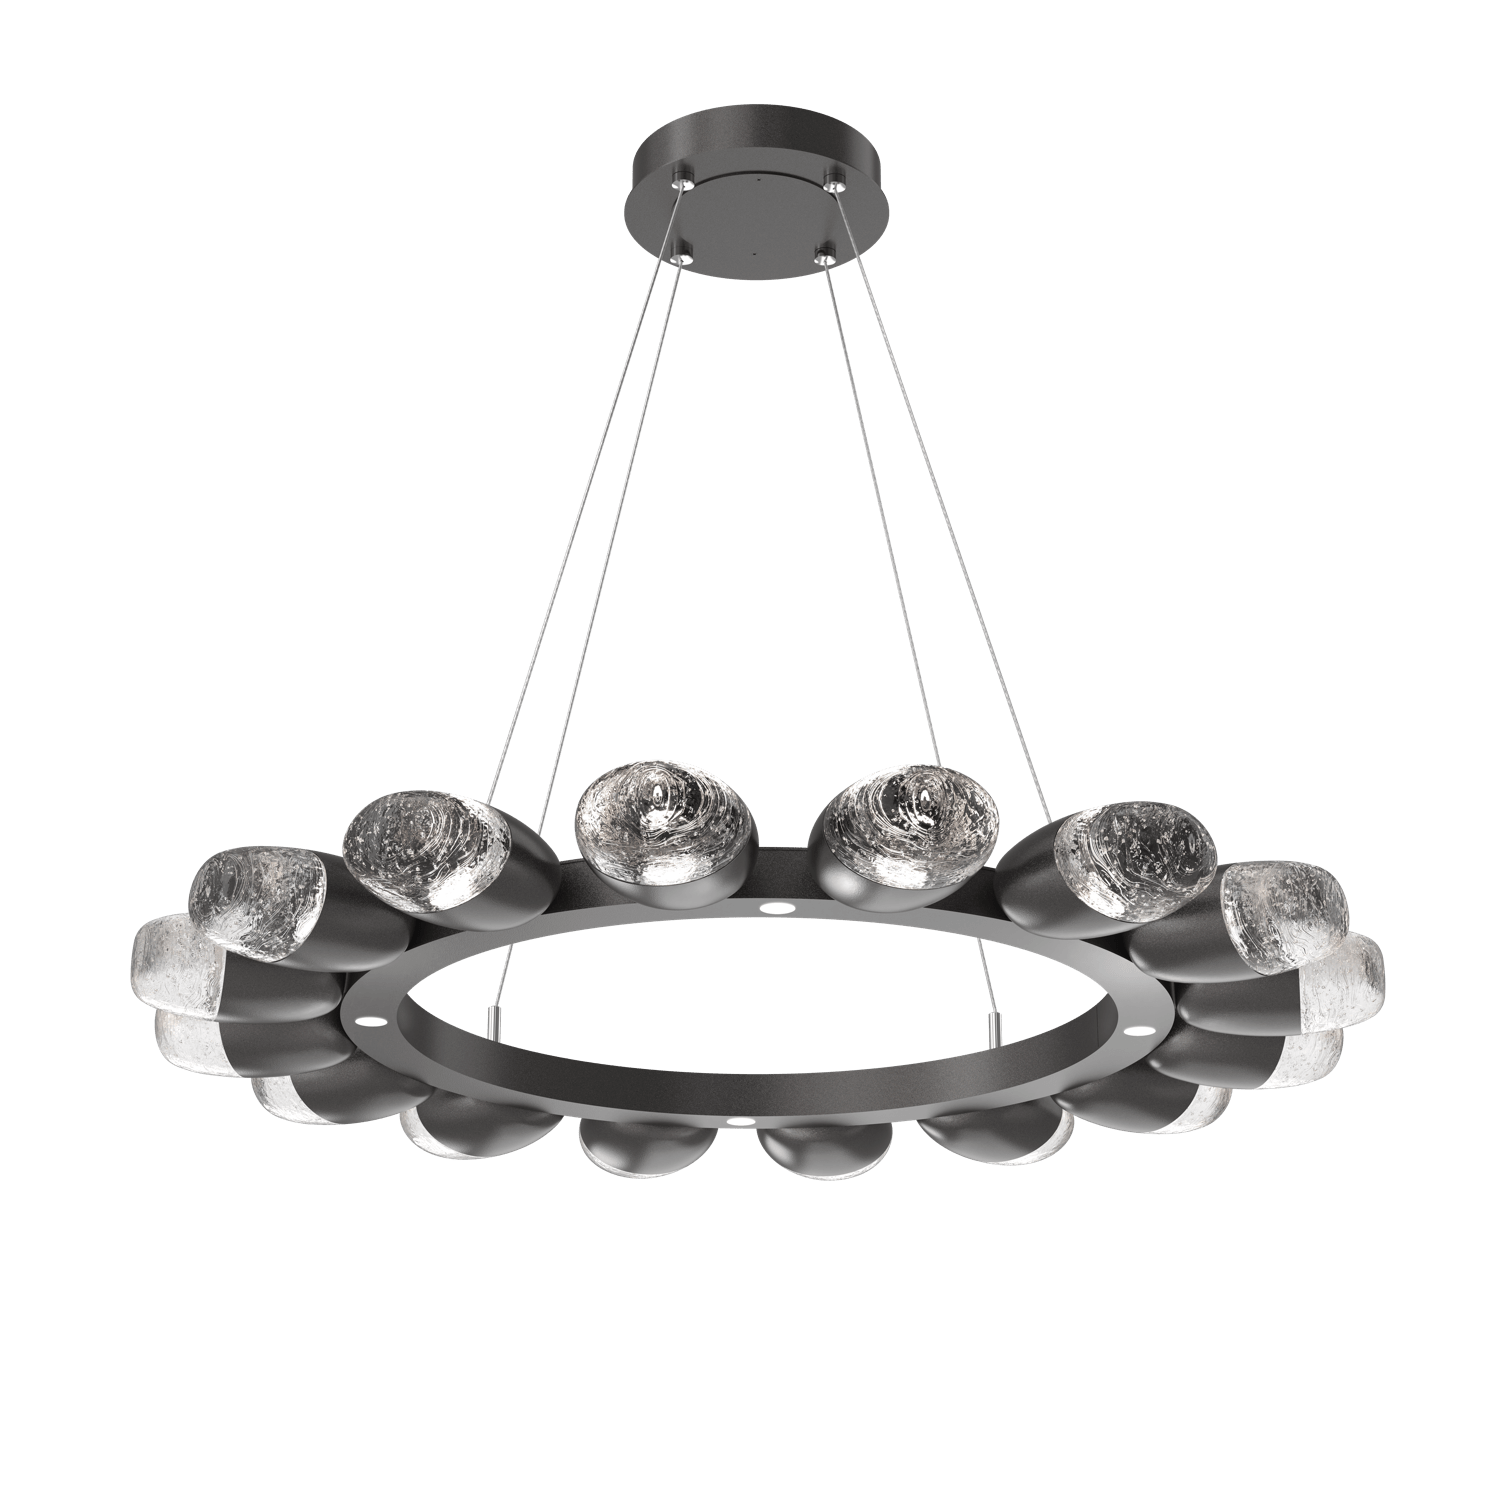 CHB0079-36-GP-Hammerton-Studio-Pebble-36-inch-radial-ring-chandelier-with-graphite-finish-and-clear-cast-glass-shades-and-LED-lamping